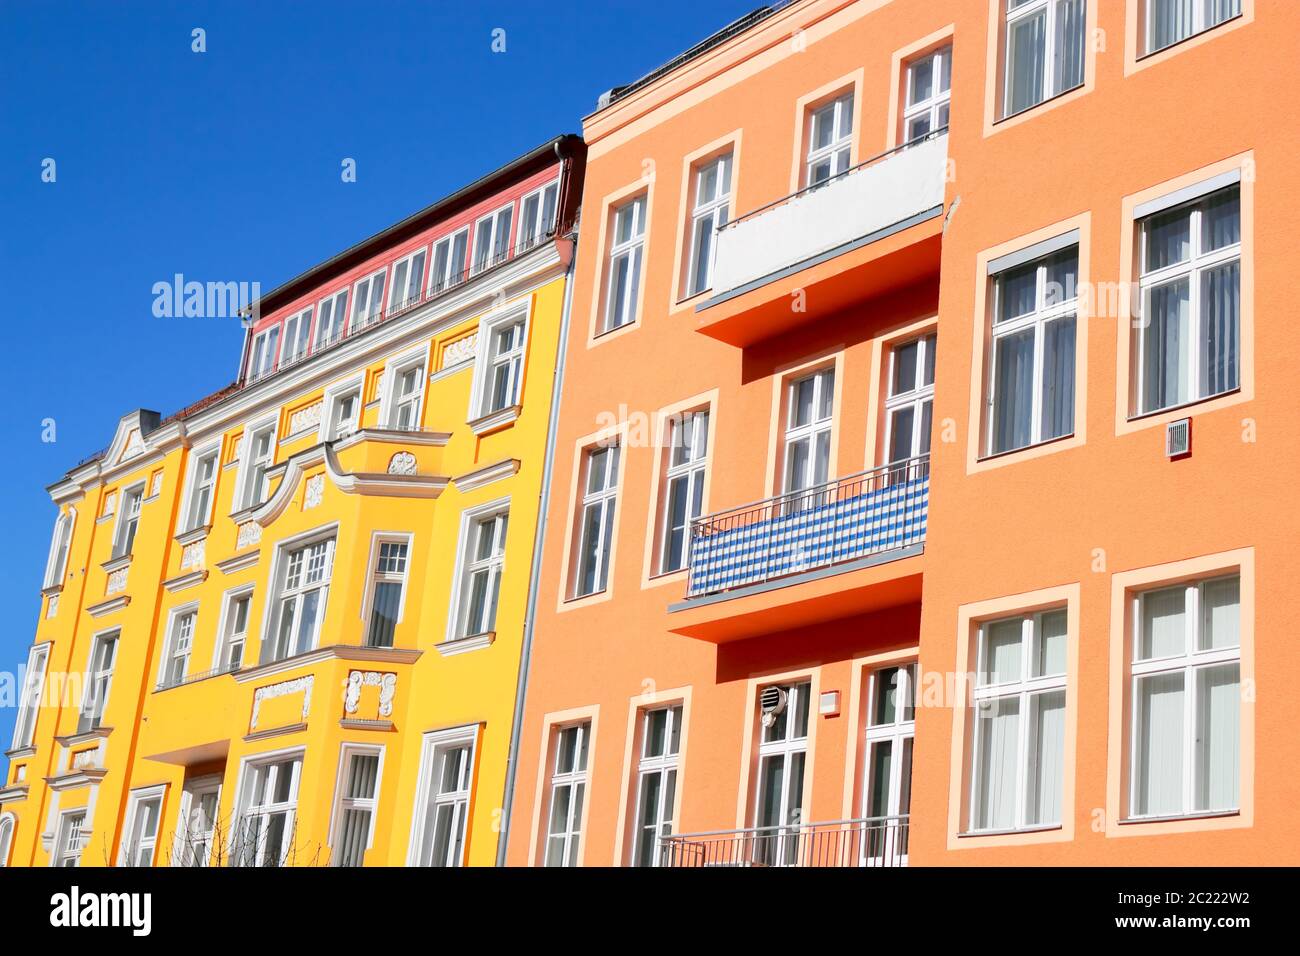 Colored row of houses Stock Photo